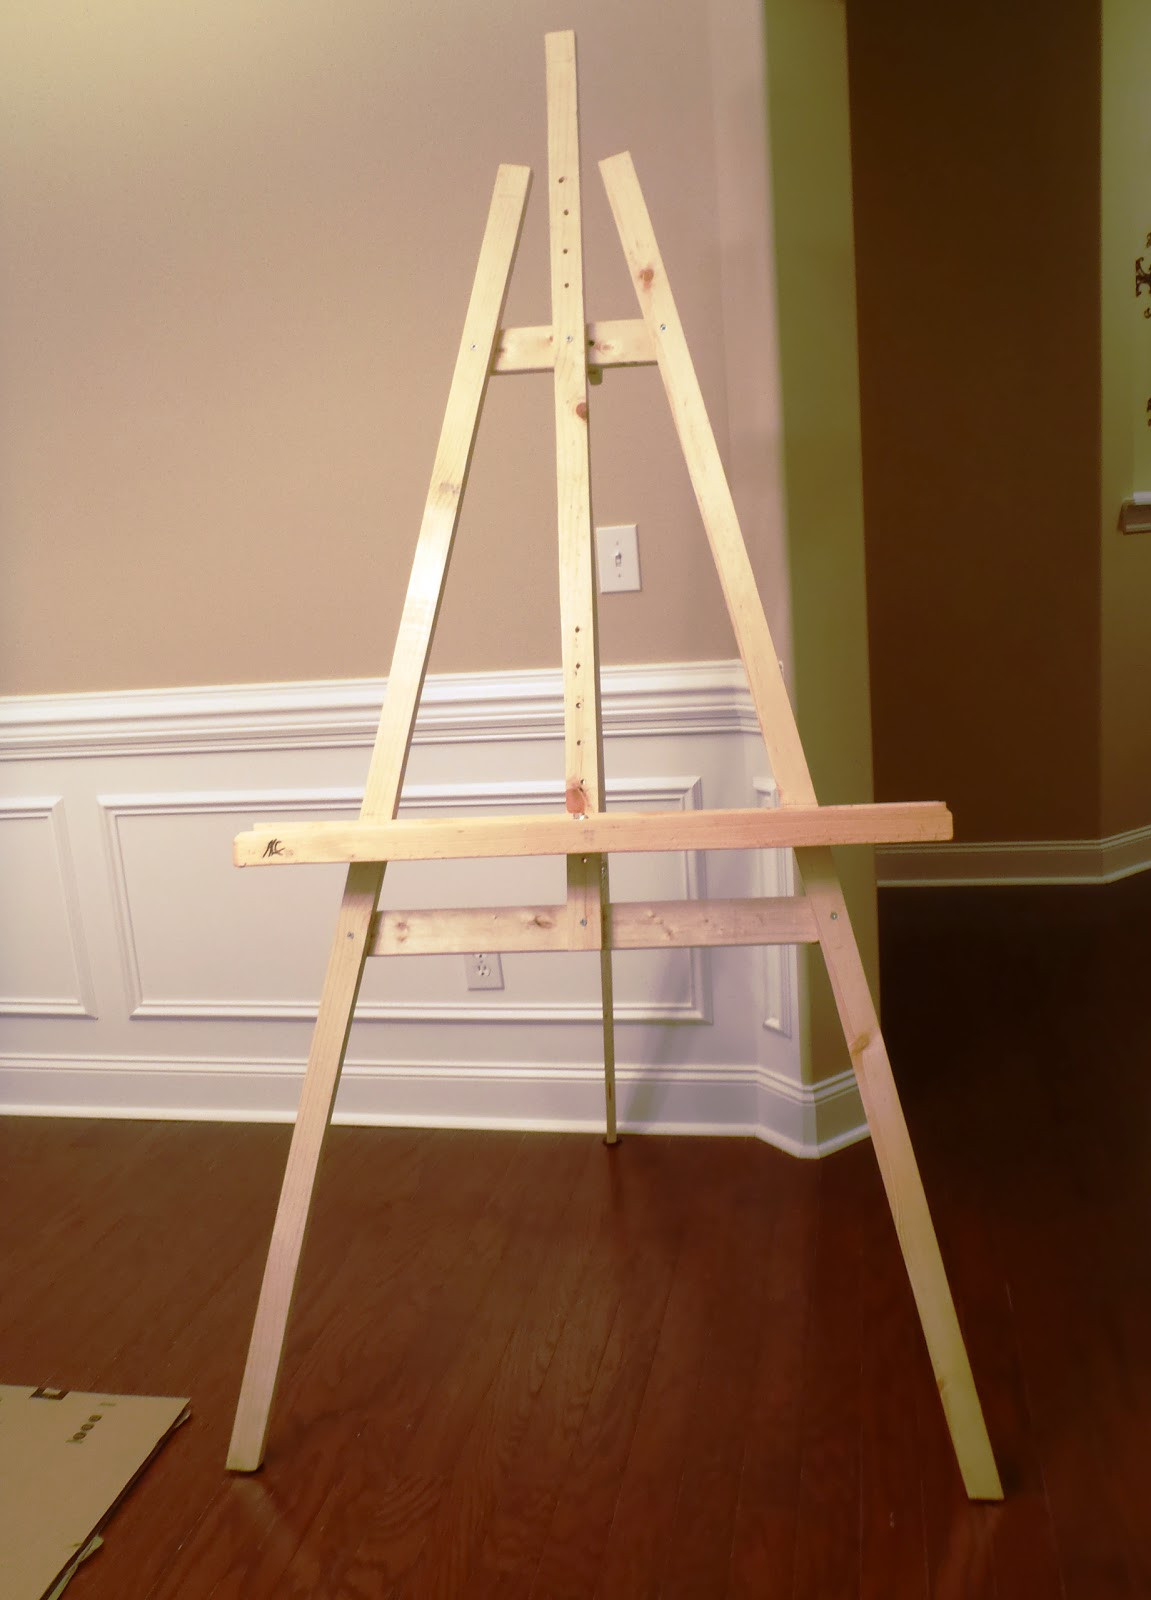 DIY Easel Plans
 Lazy Liz on Less Build a Cheap Quick and Easy Artist Easel